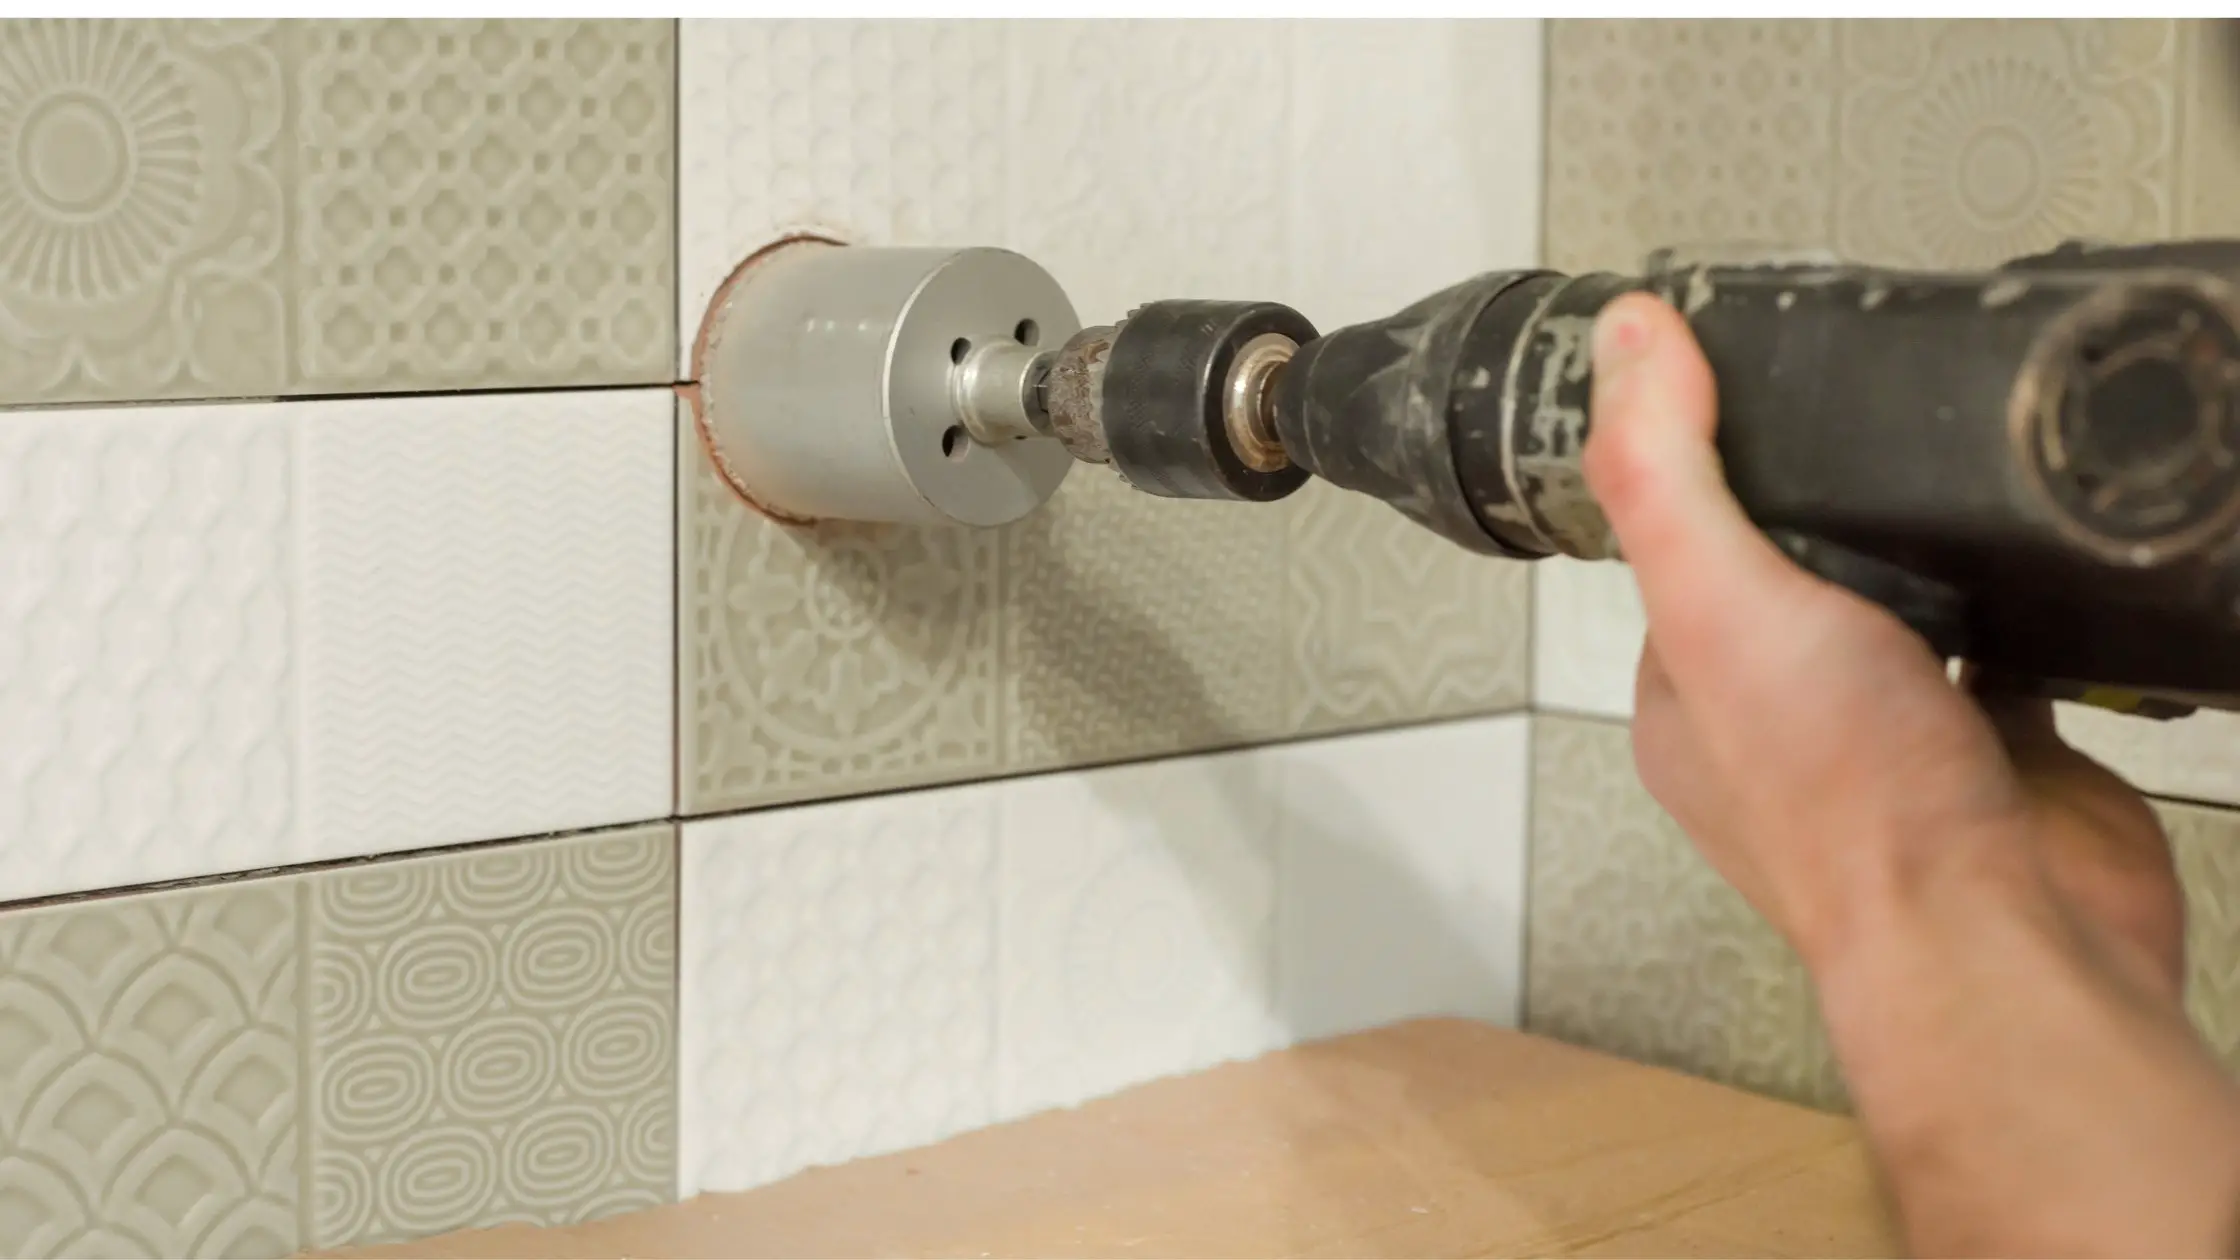 How to Drill into Tile?